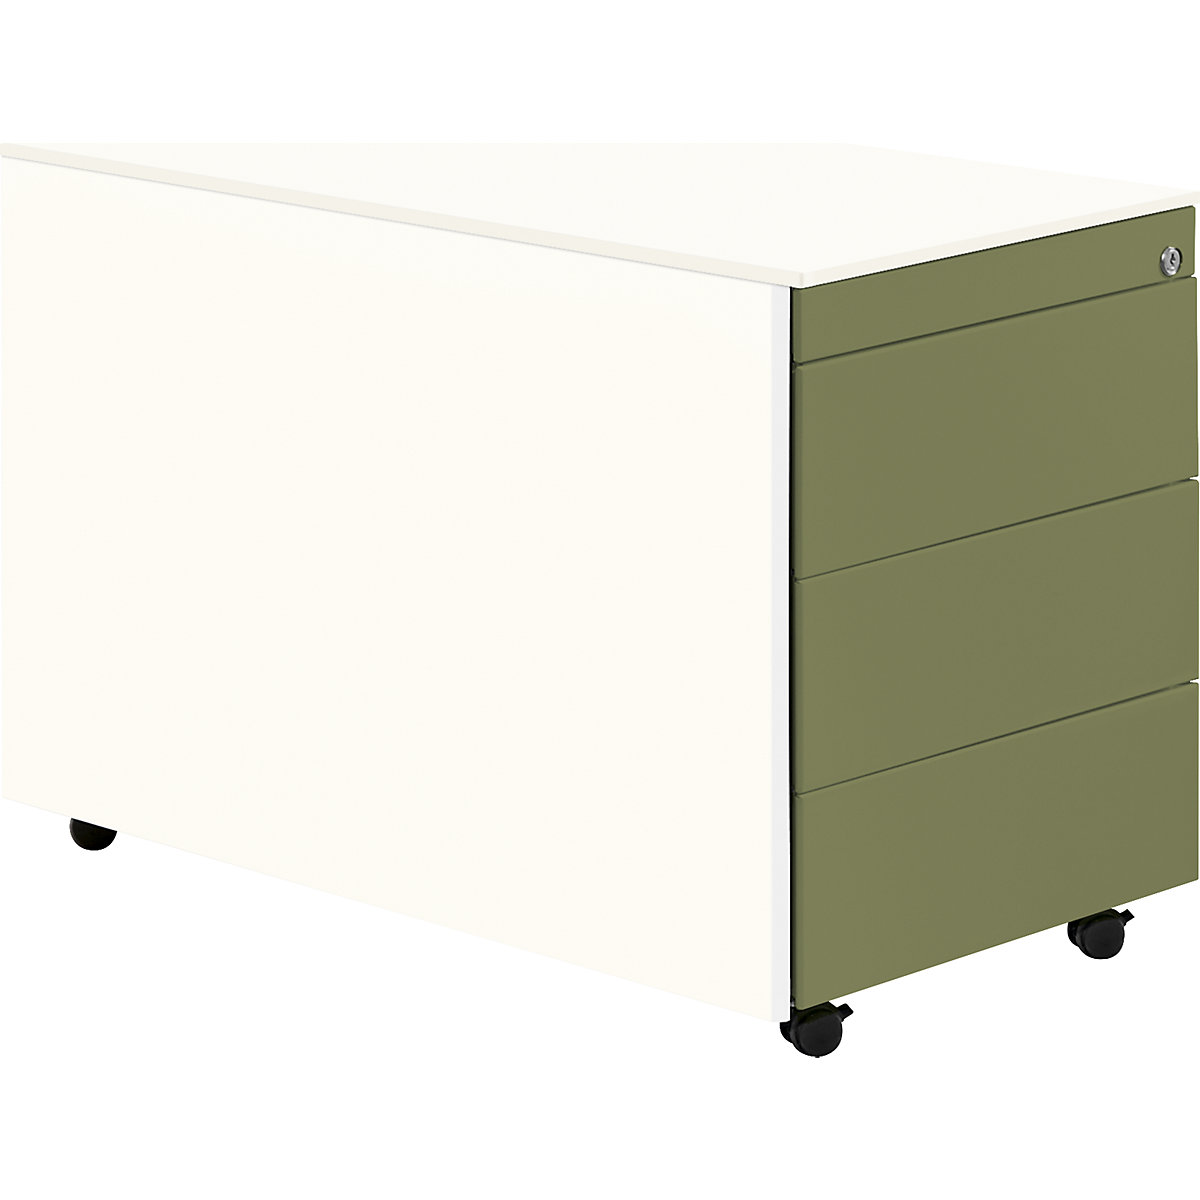 Drawer pedestal with castors – mauser, HxD 570 x 800 mm, steel top, 3 drawers, pure white / reed green / pure white-10